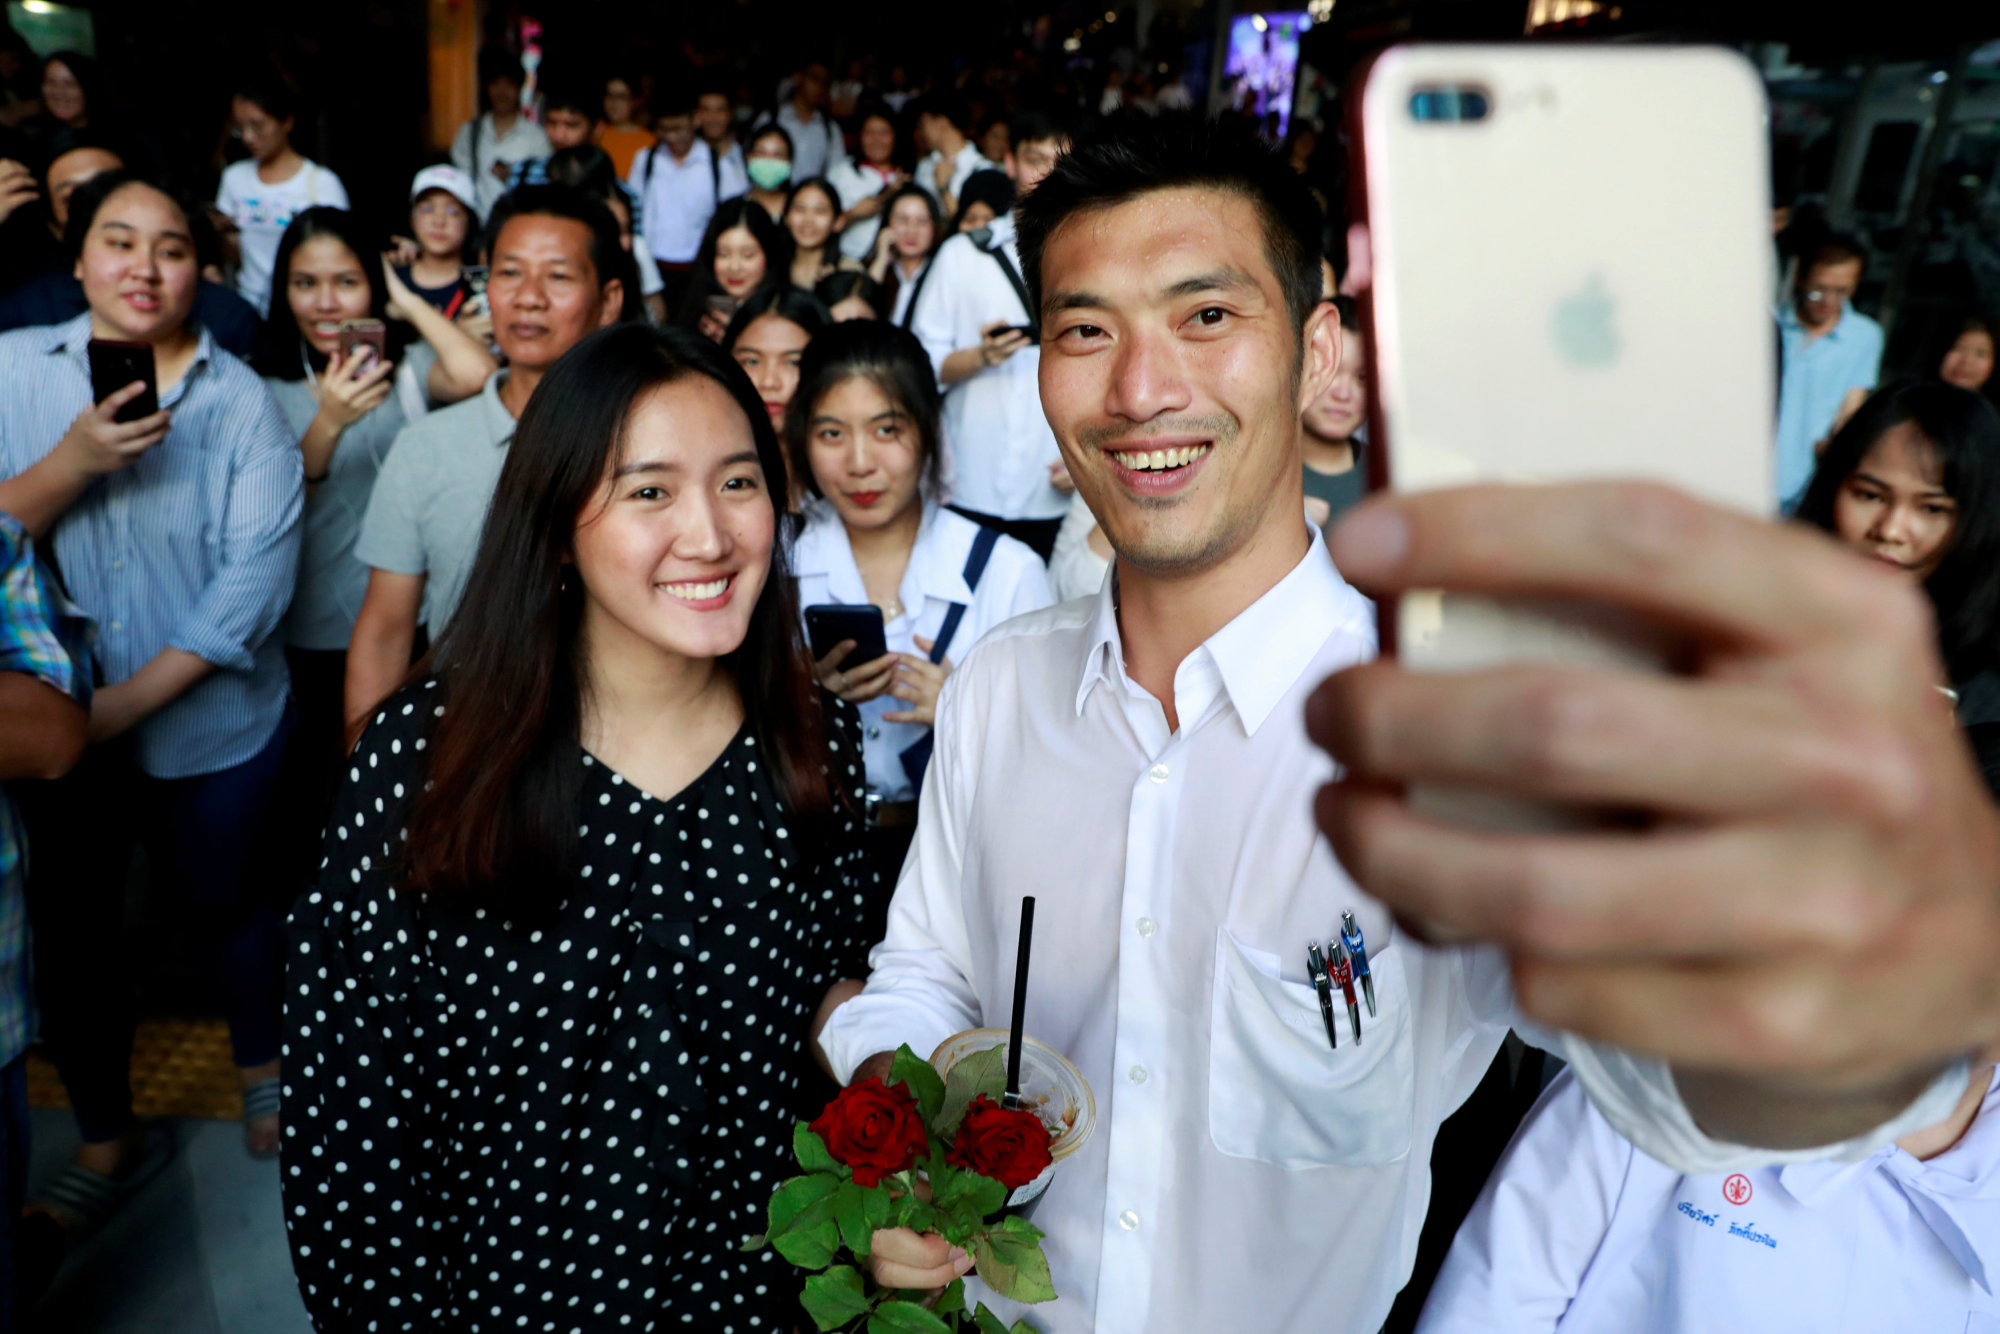 Thanathorn Juangroongruangkit, leader of the Future Forward Party, takes a selfie with his supporters during a campaign rally in Bangkok on Feb. 20. | REUTERS